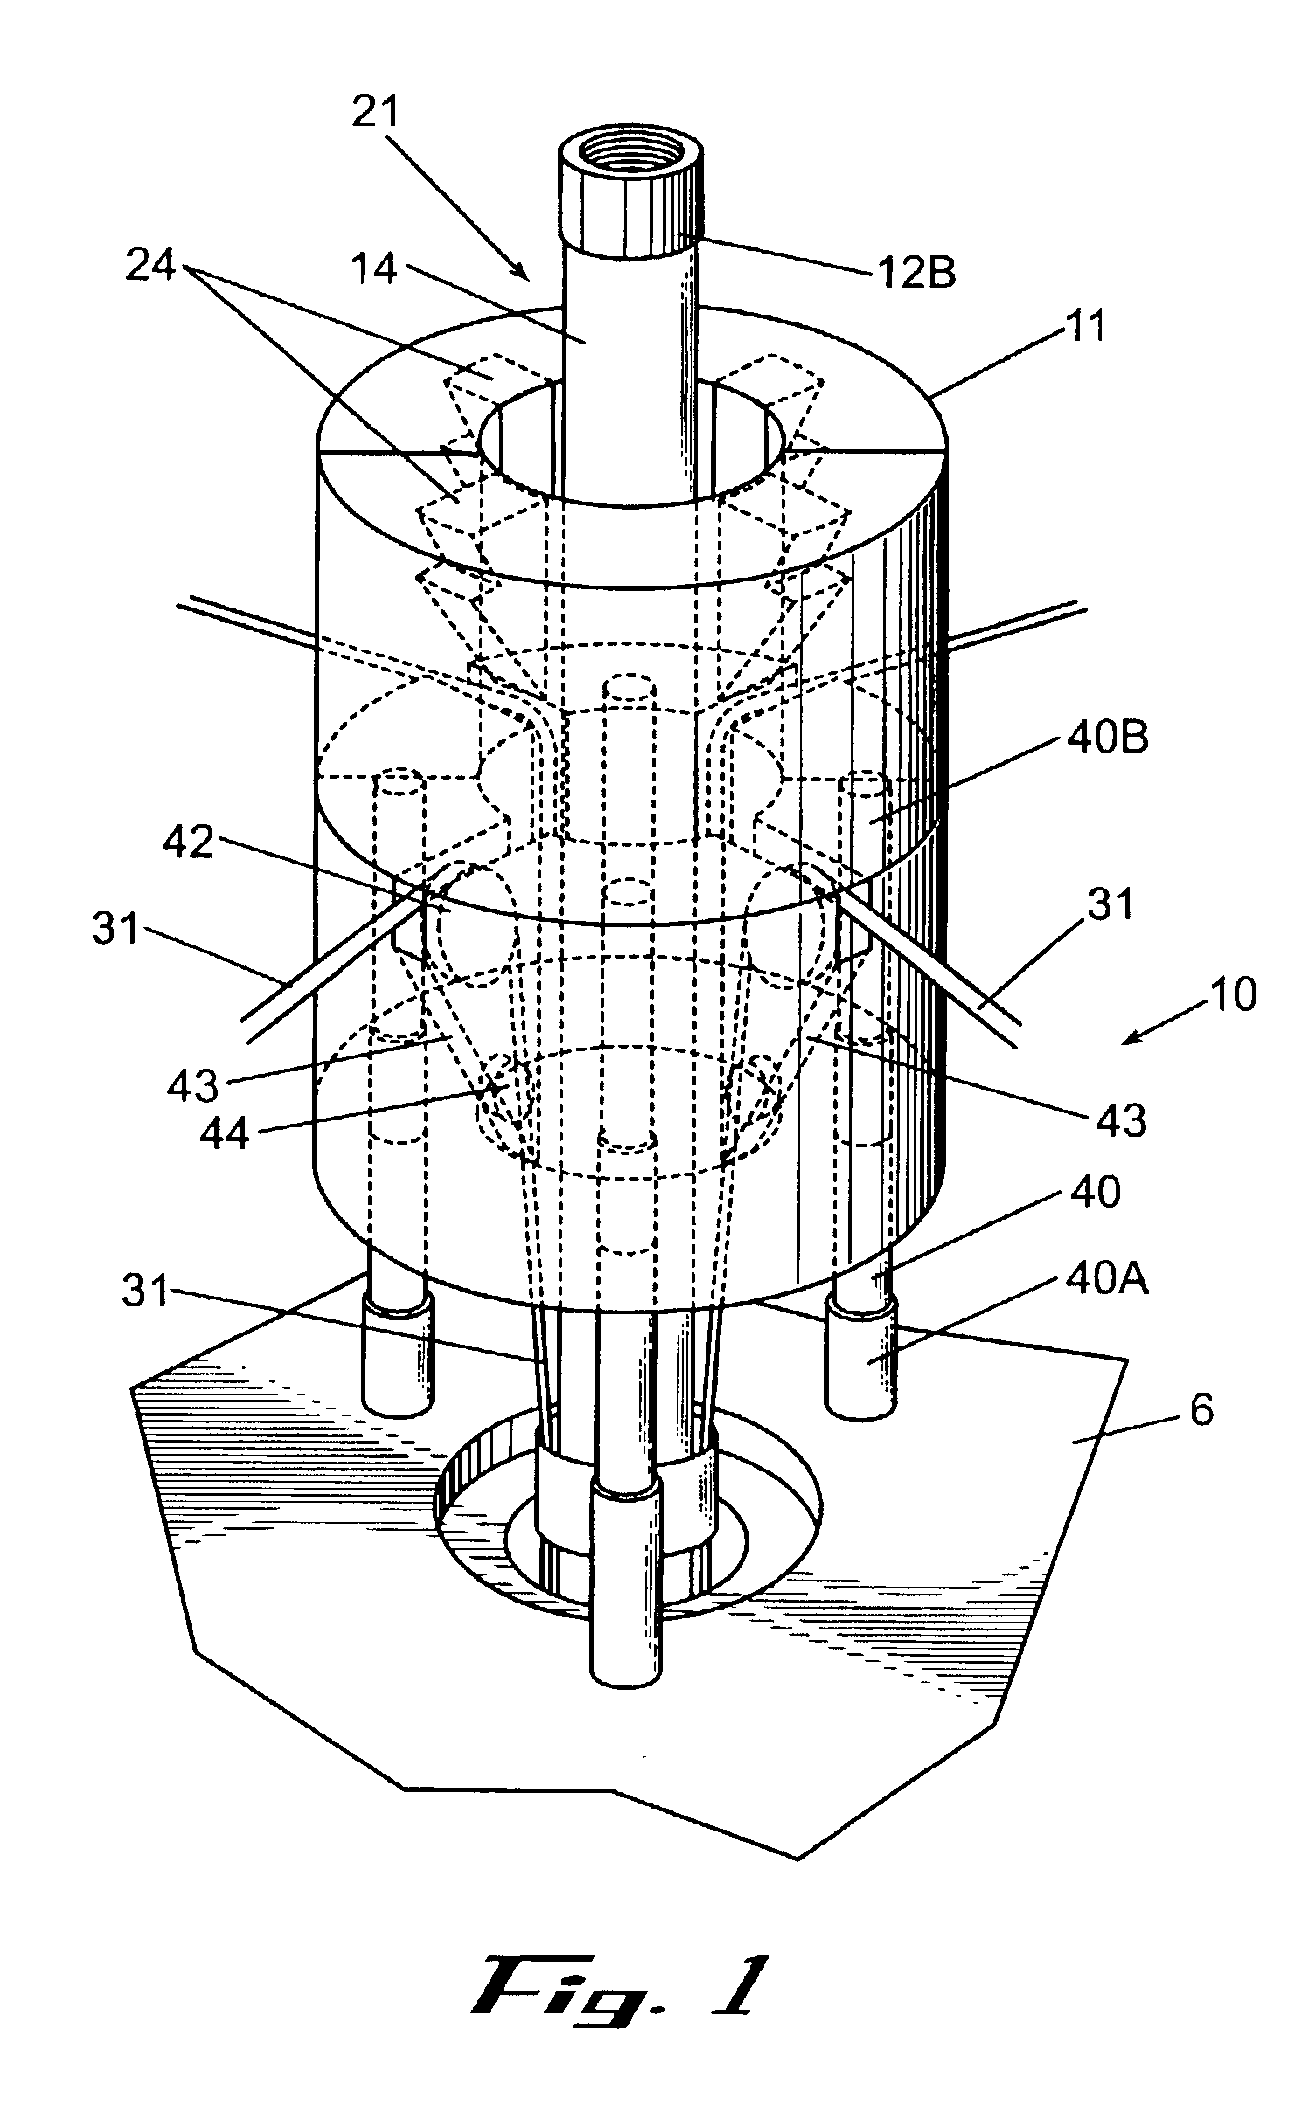 Method and apparatus for installing control lines in a well